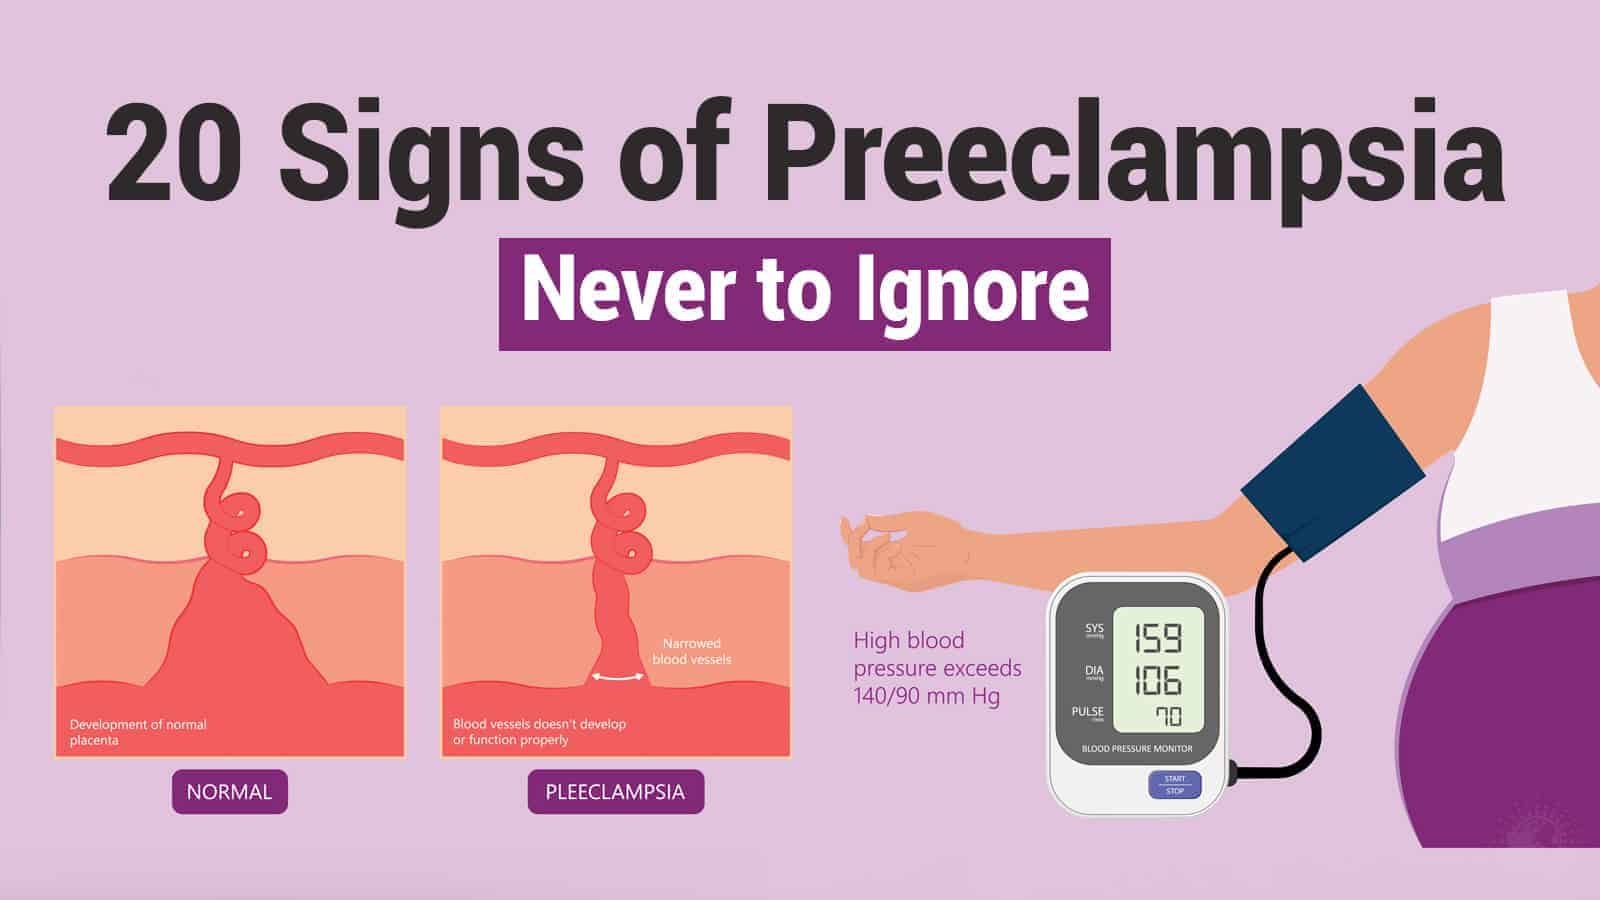 20 Signs of Preeclampsia Never to Ignore